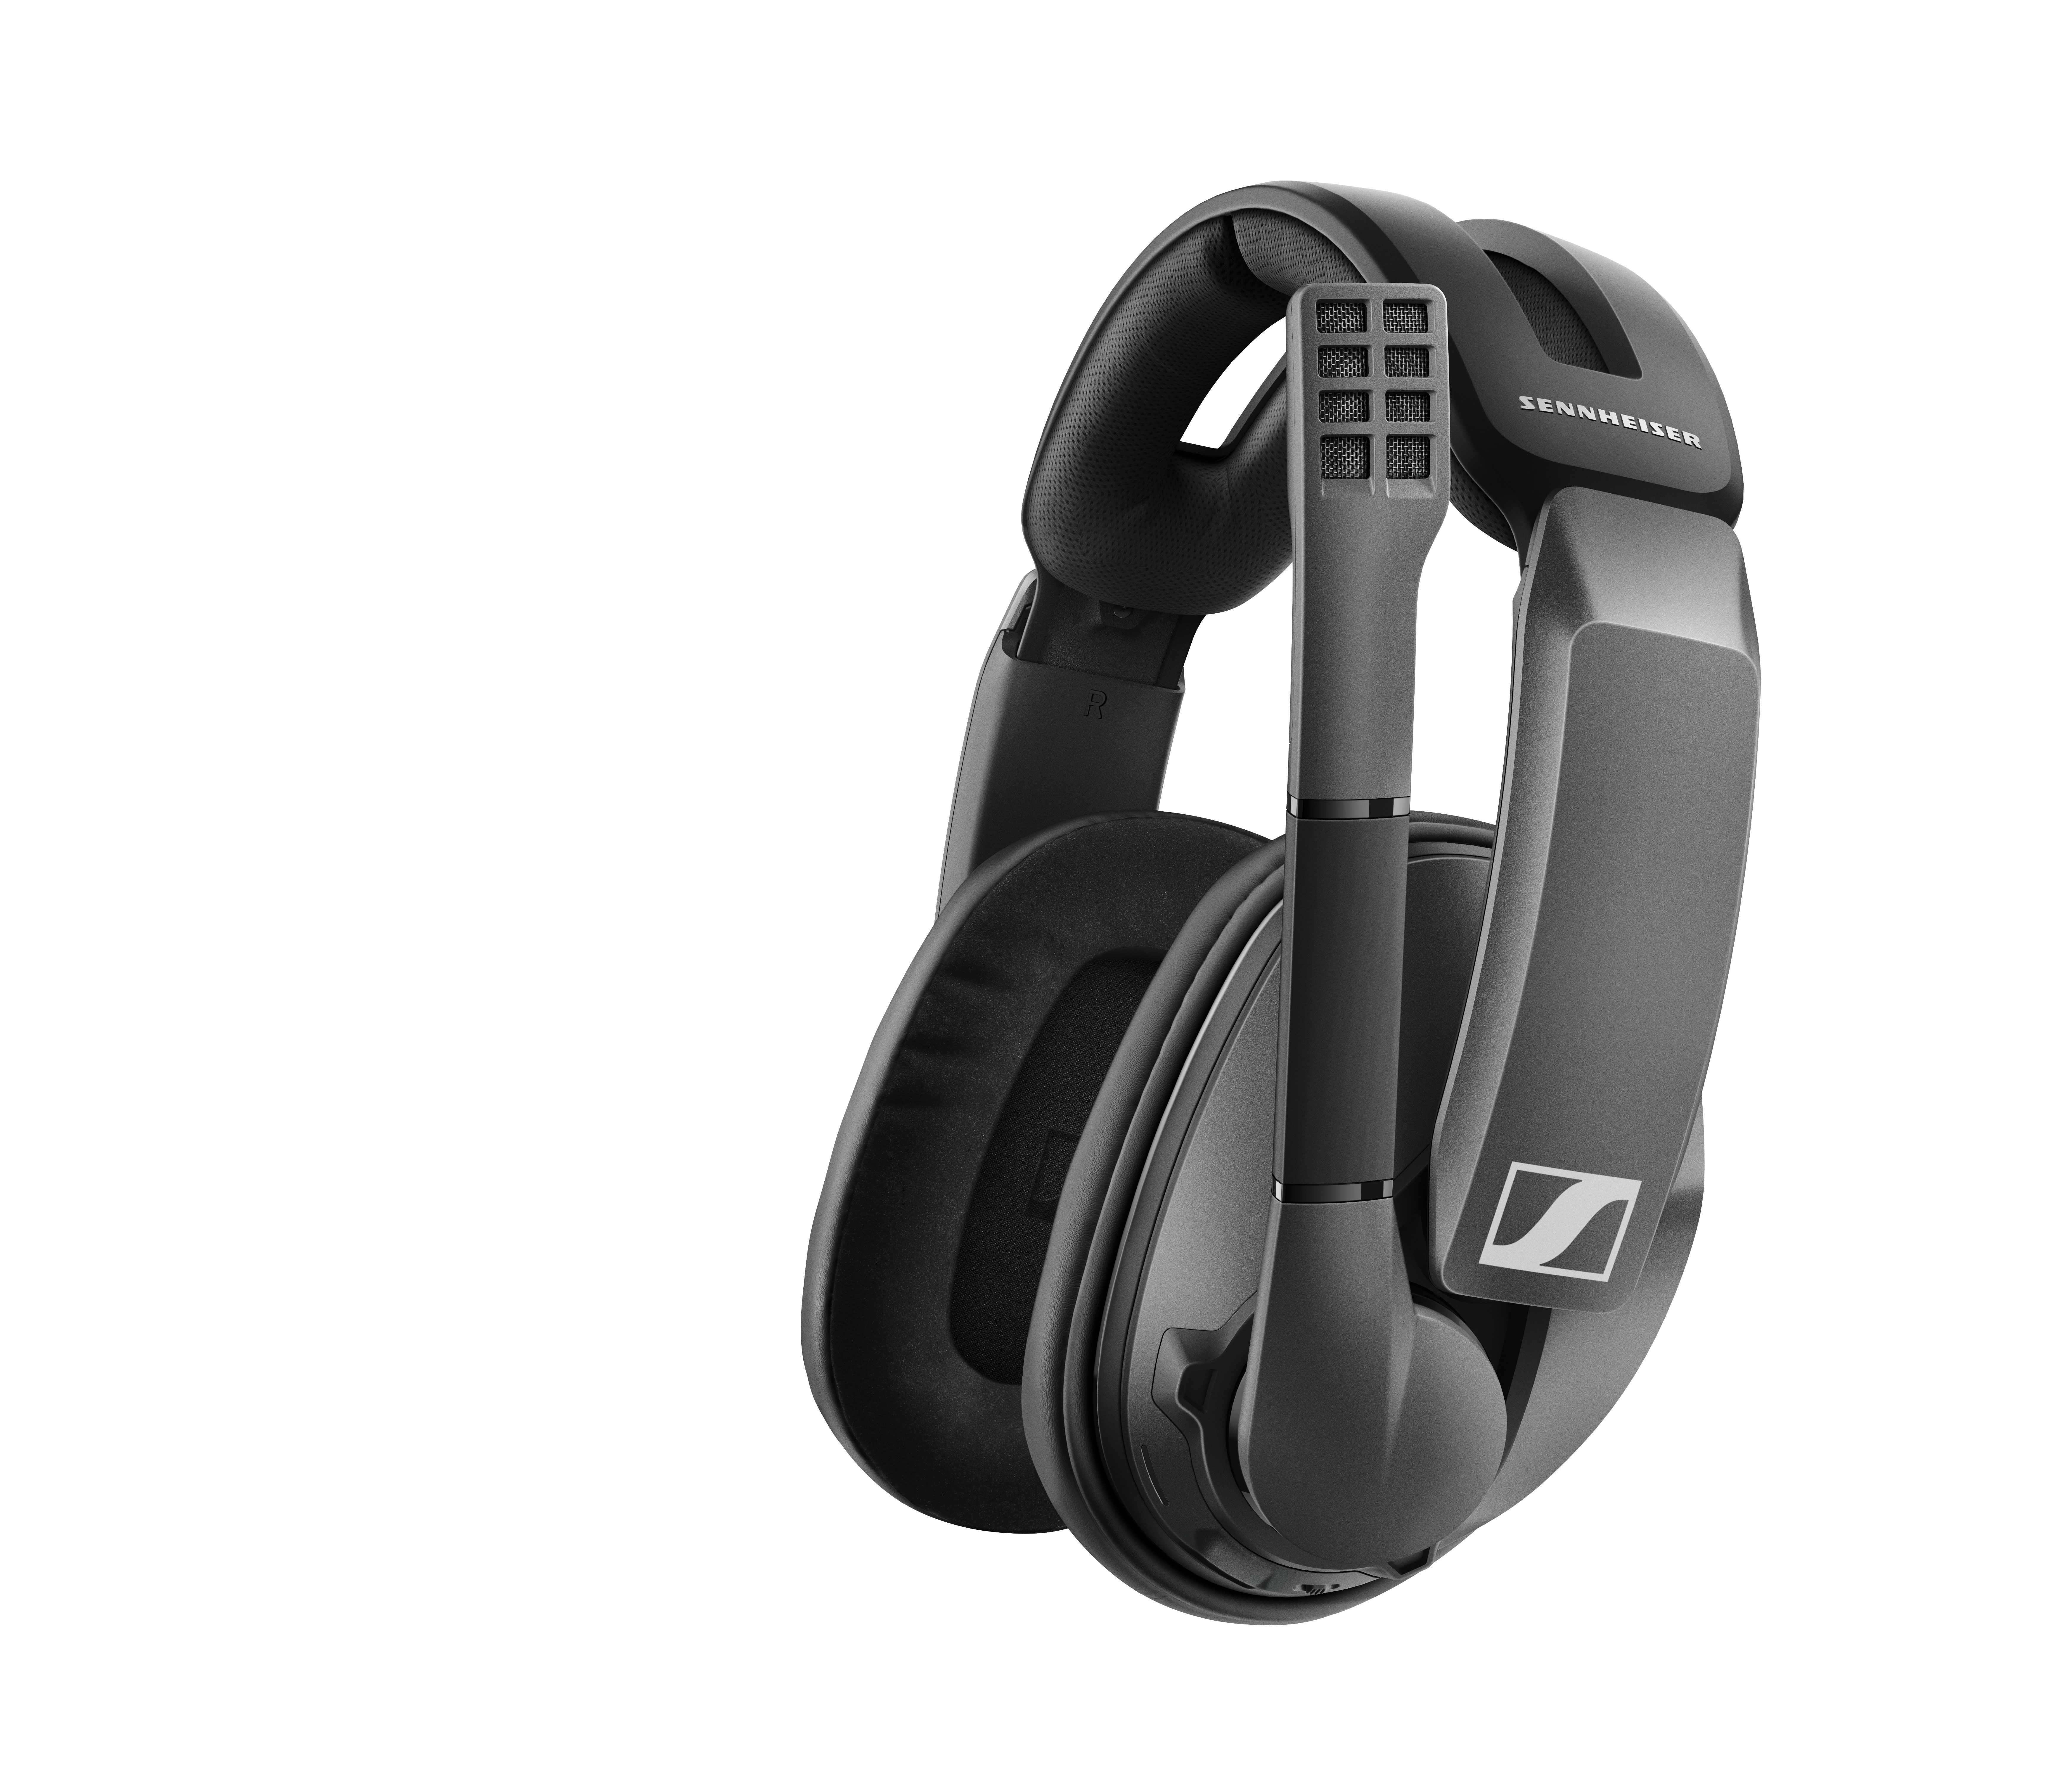 The new Sennheiser GSP 370 features a low-latency connection as well as a long-lasting, integrated rechargeable battery. This results in a stable and lag-free sound with an exceptional battery life of up to 100 hours.